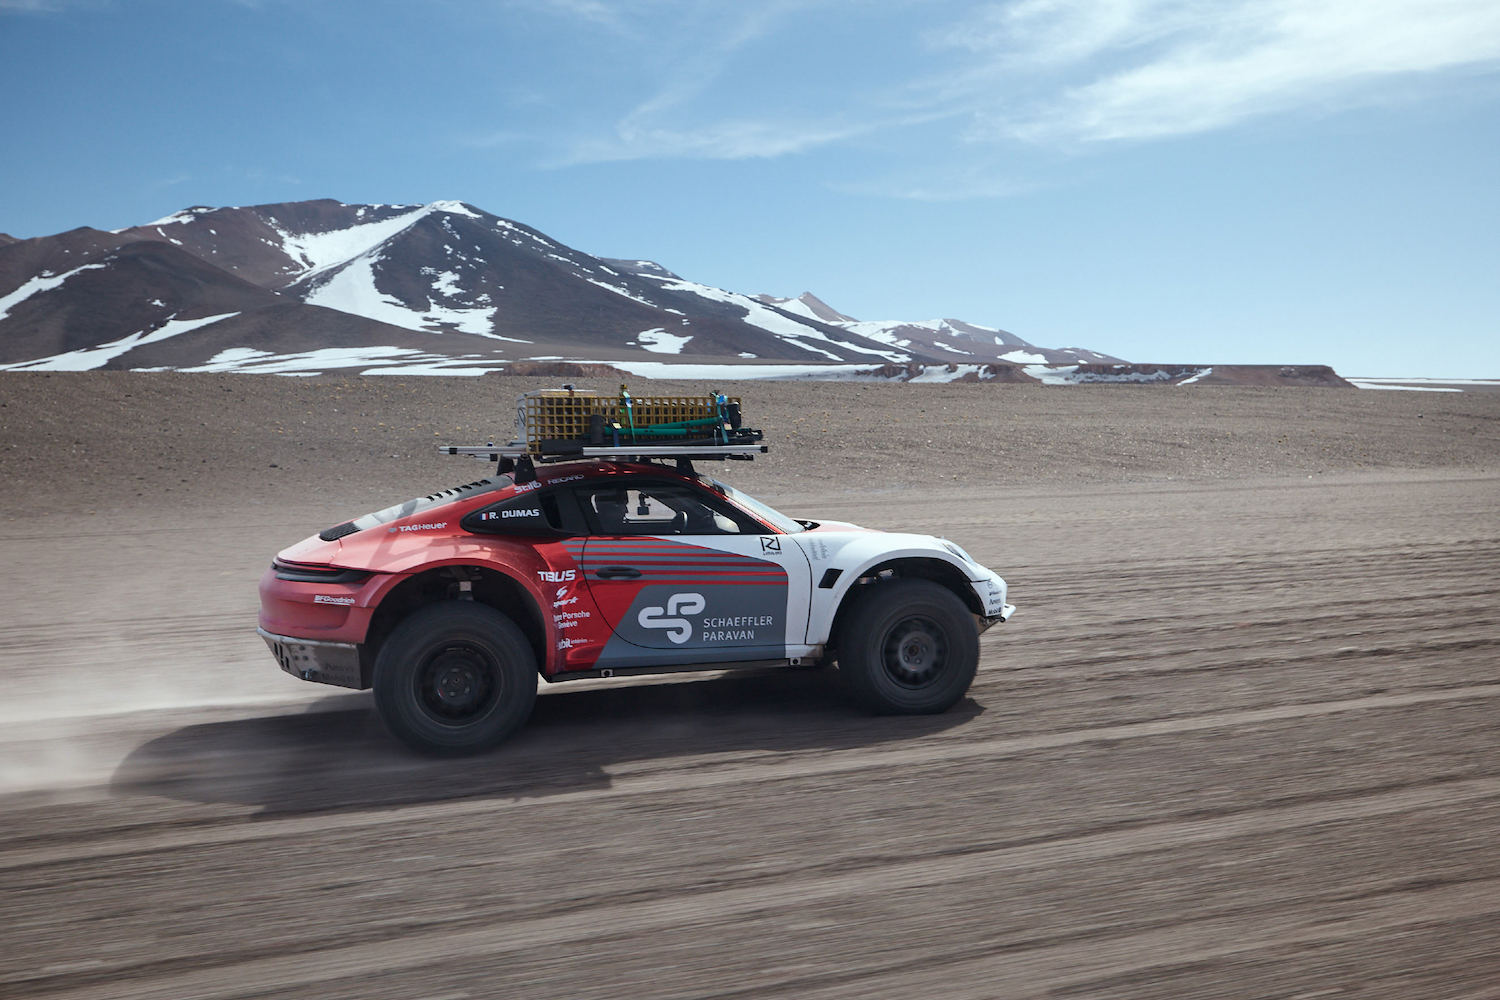 Porsche 911 Dakar Prototype rear end driving fast on rocky terrain with snow-capped mountain in the back.